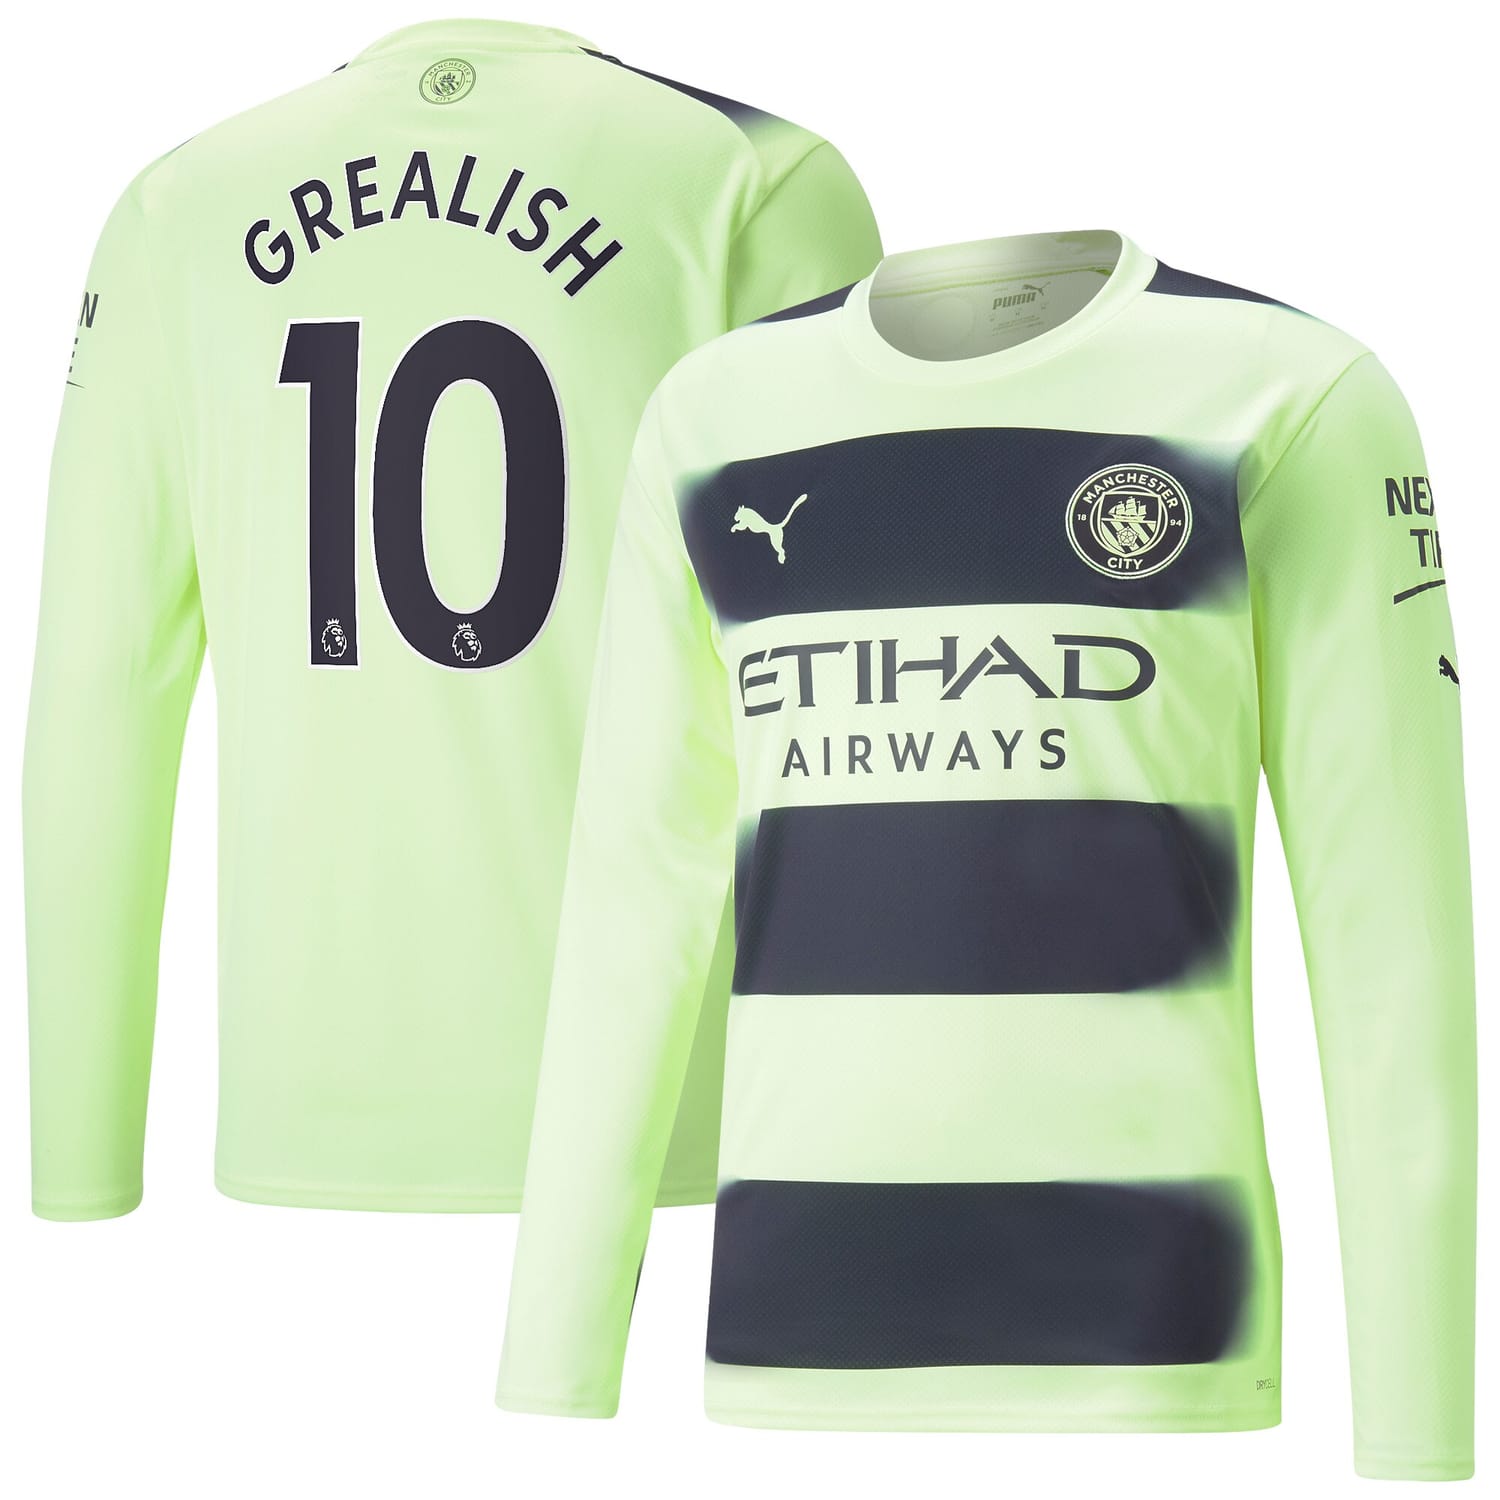 Premier League Manchester City Third Jersey Shirt Long Sleeve 2022-23 player Jack Grealish 10 printing for Men